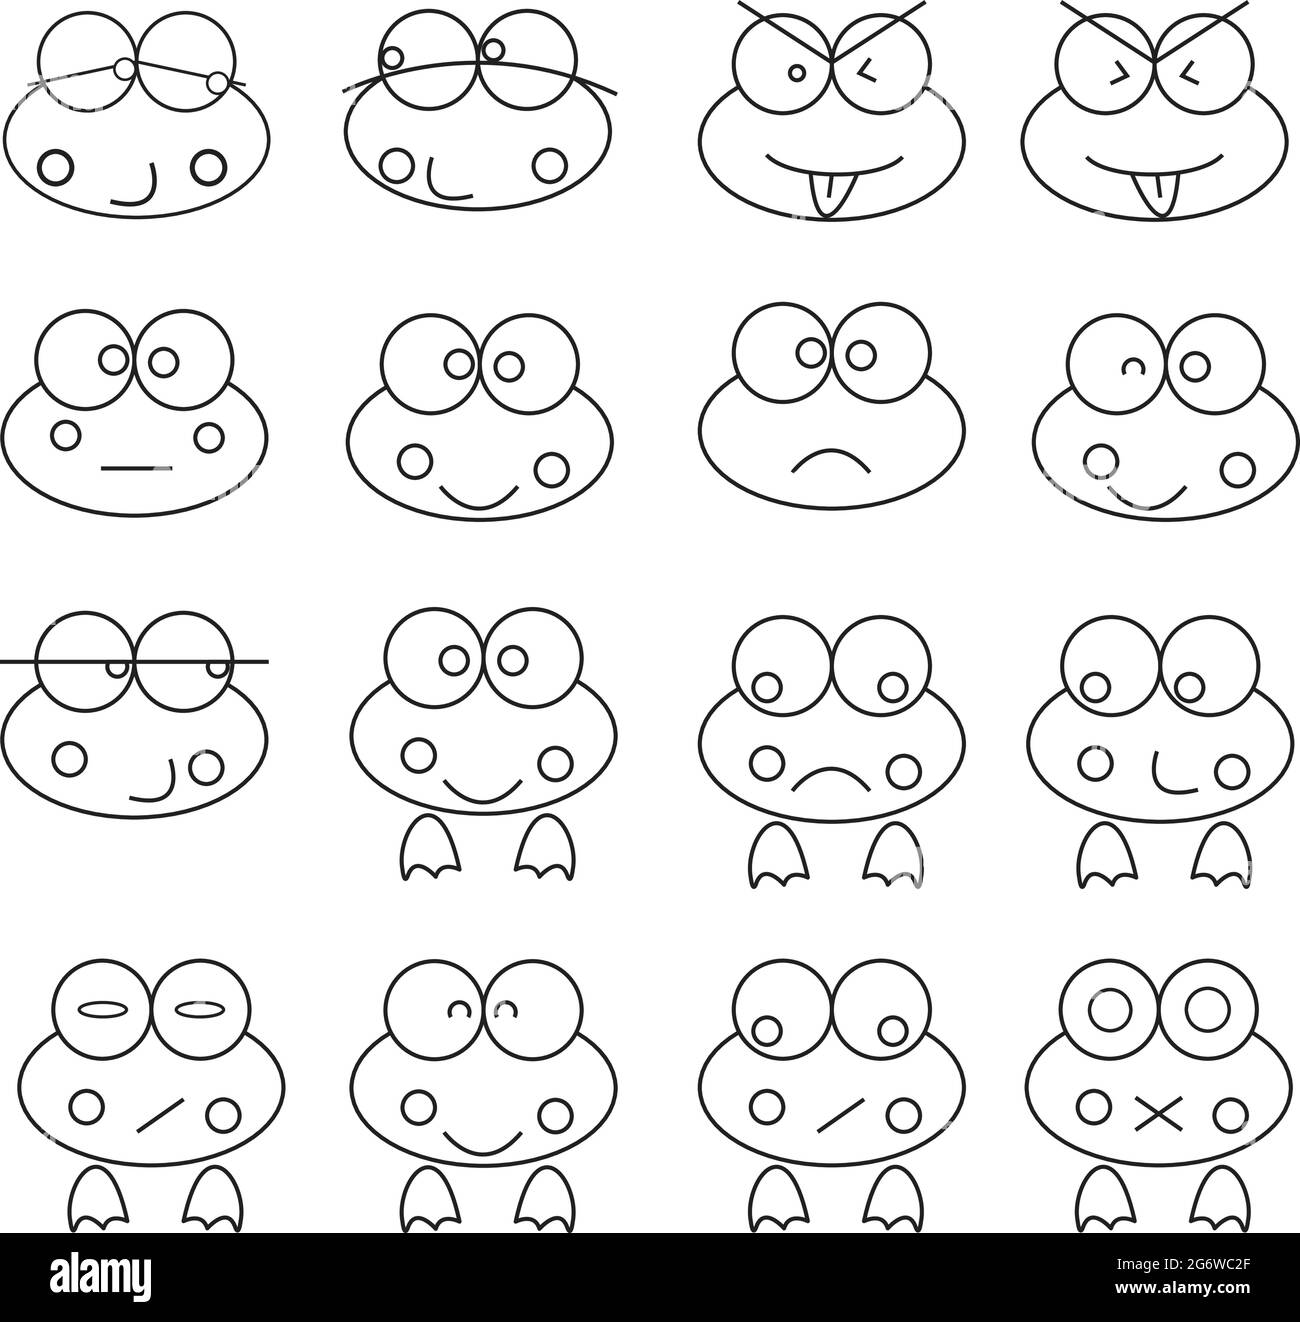 frog icon vector. frog icon design can be used for icon logos, applications, and others Stock Vector